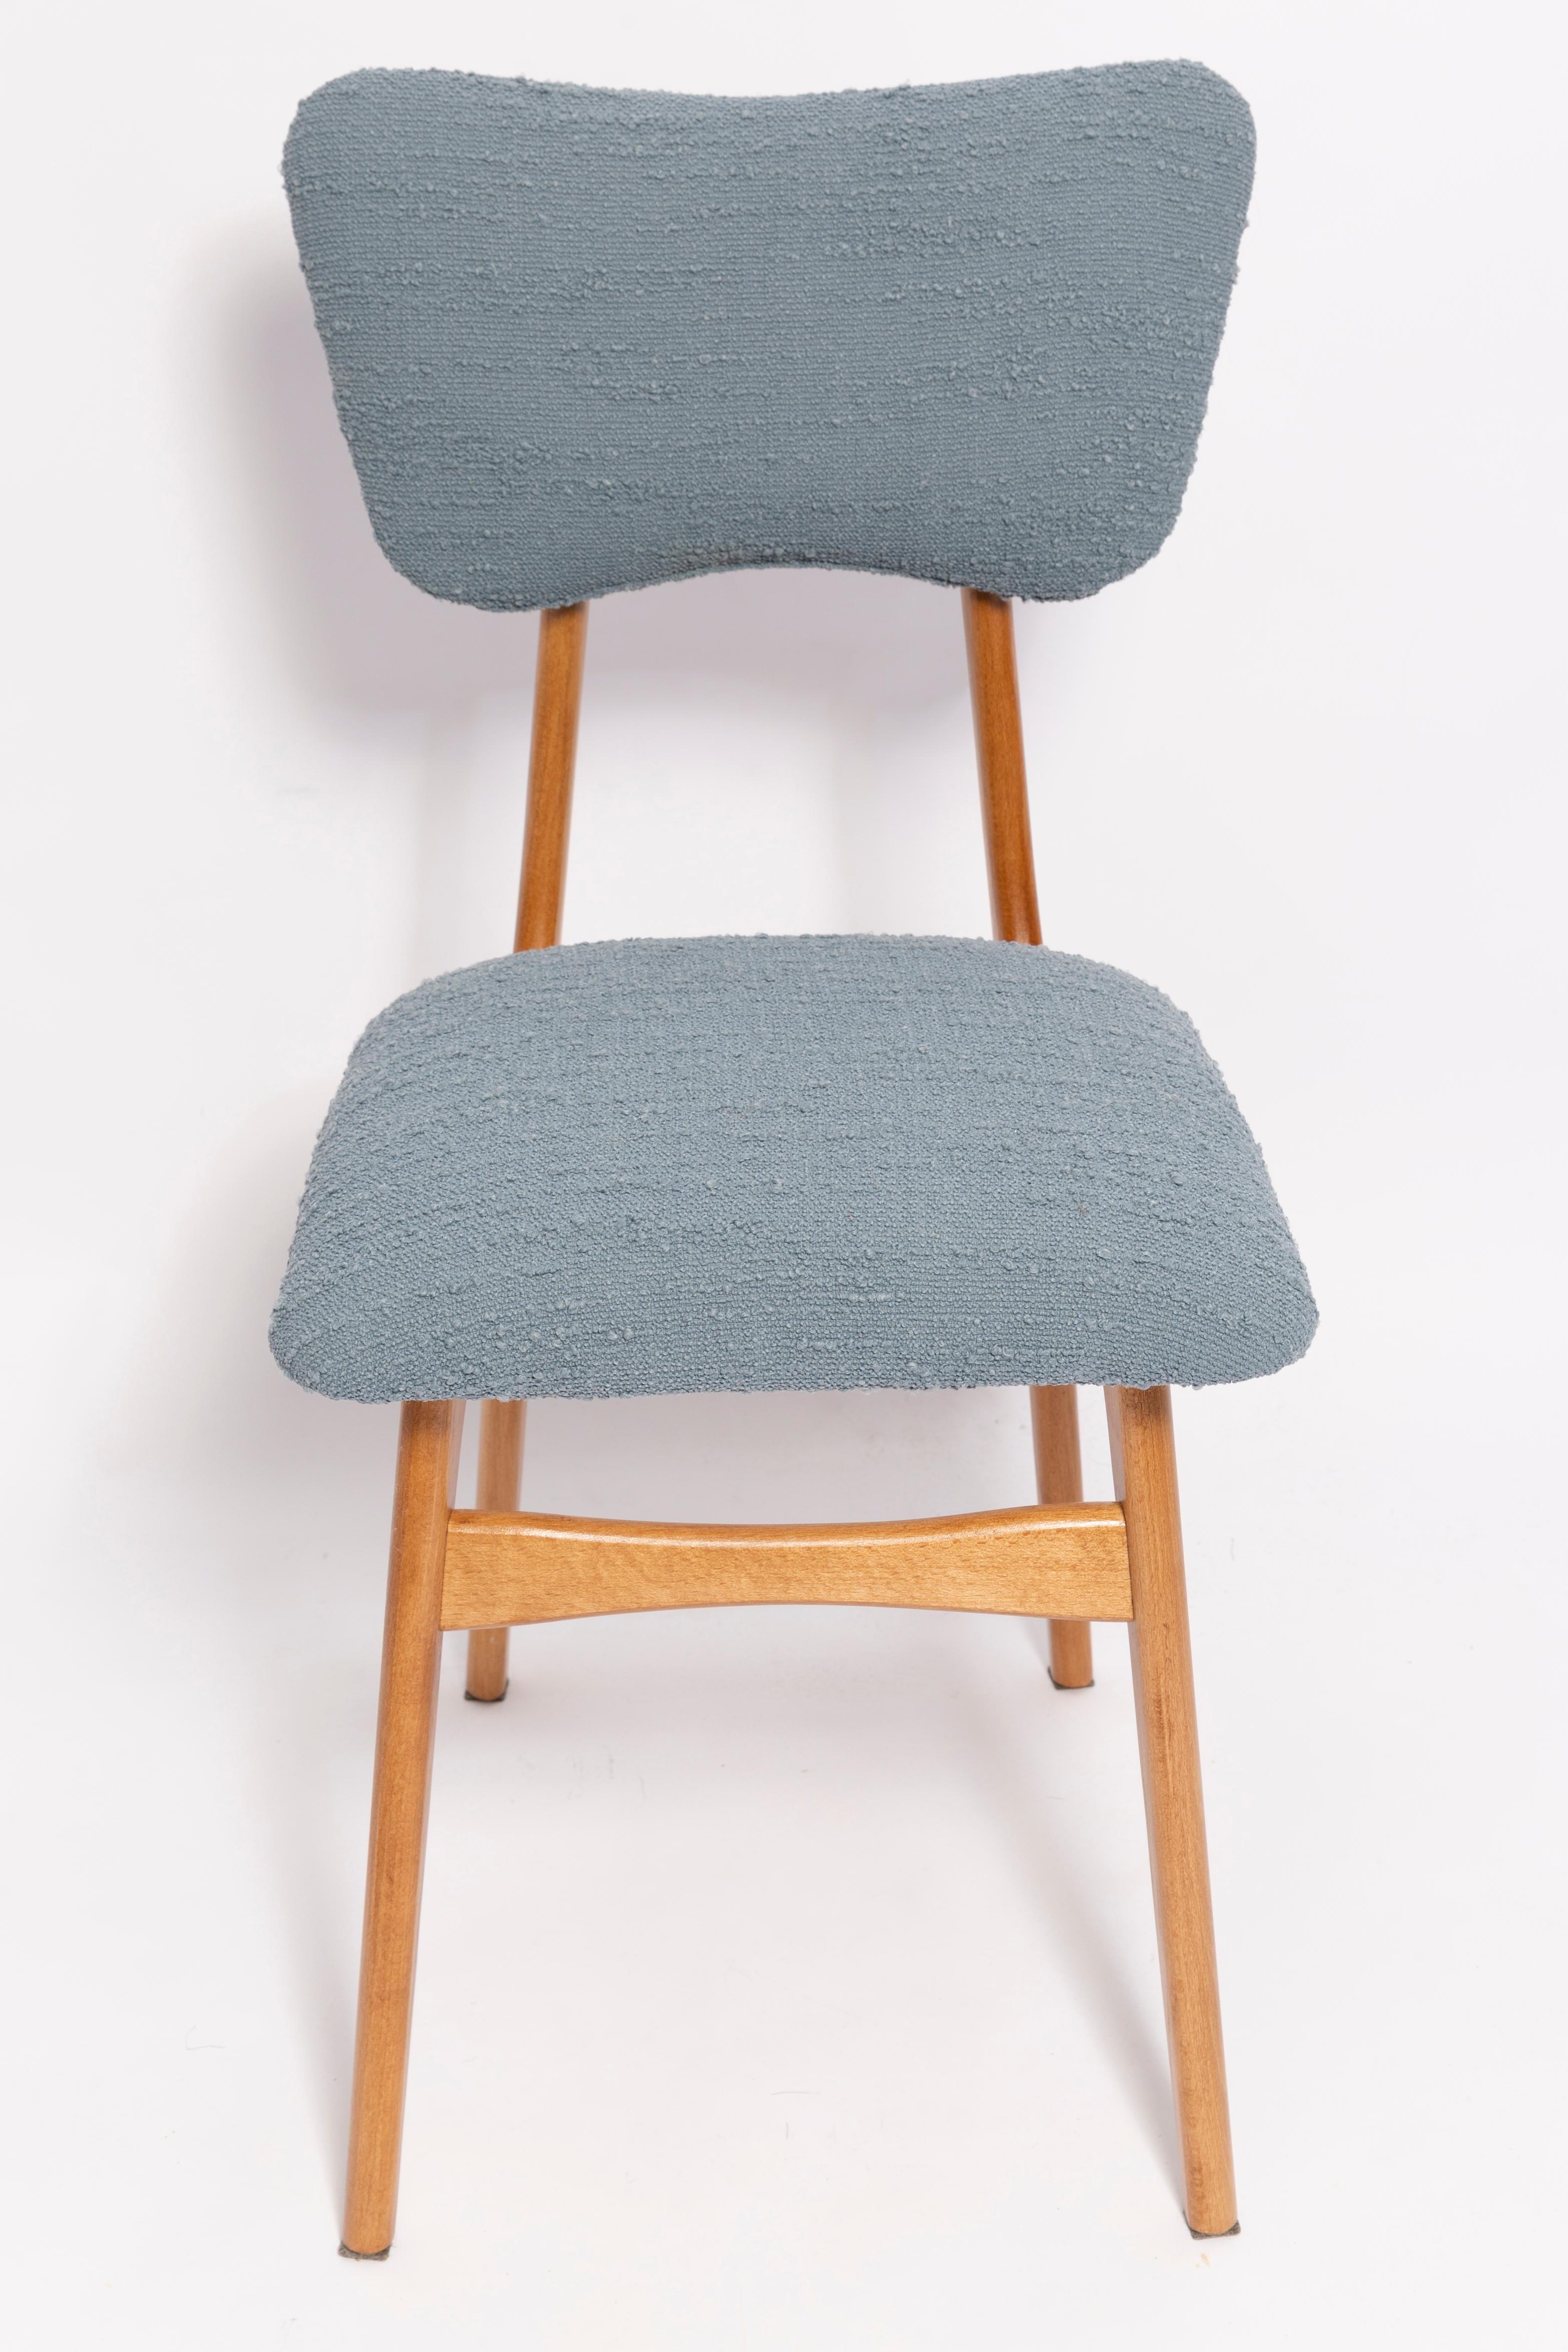 Set of Six Mid Century Butterfly Dining Chairs, Gray Boucle, Europe, 1960s For Sale 5